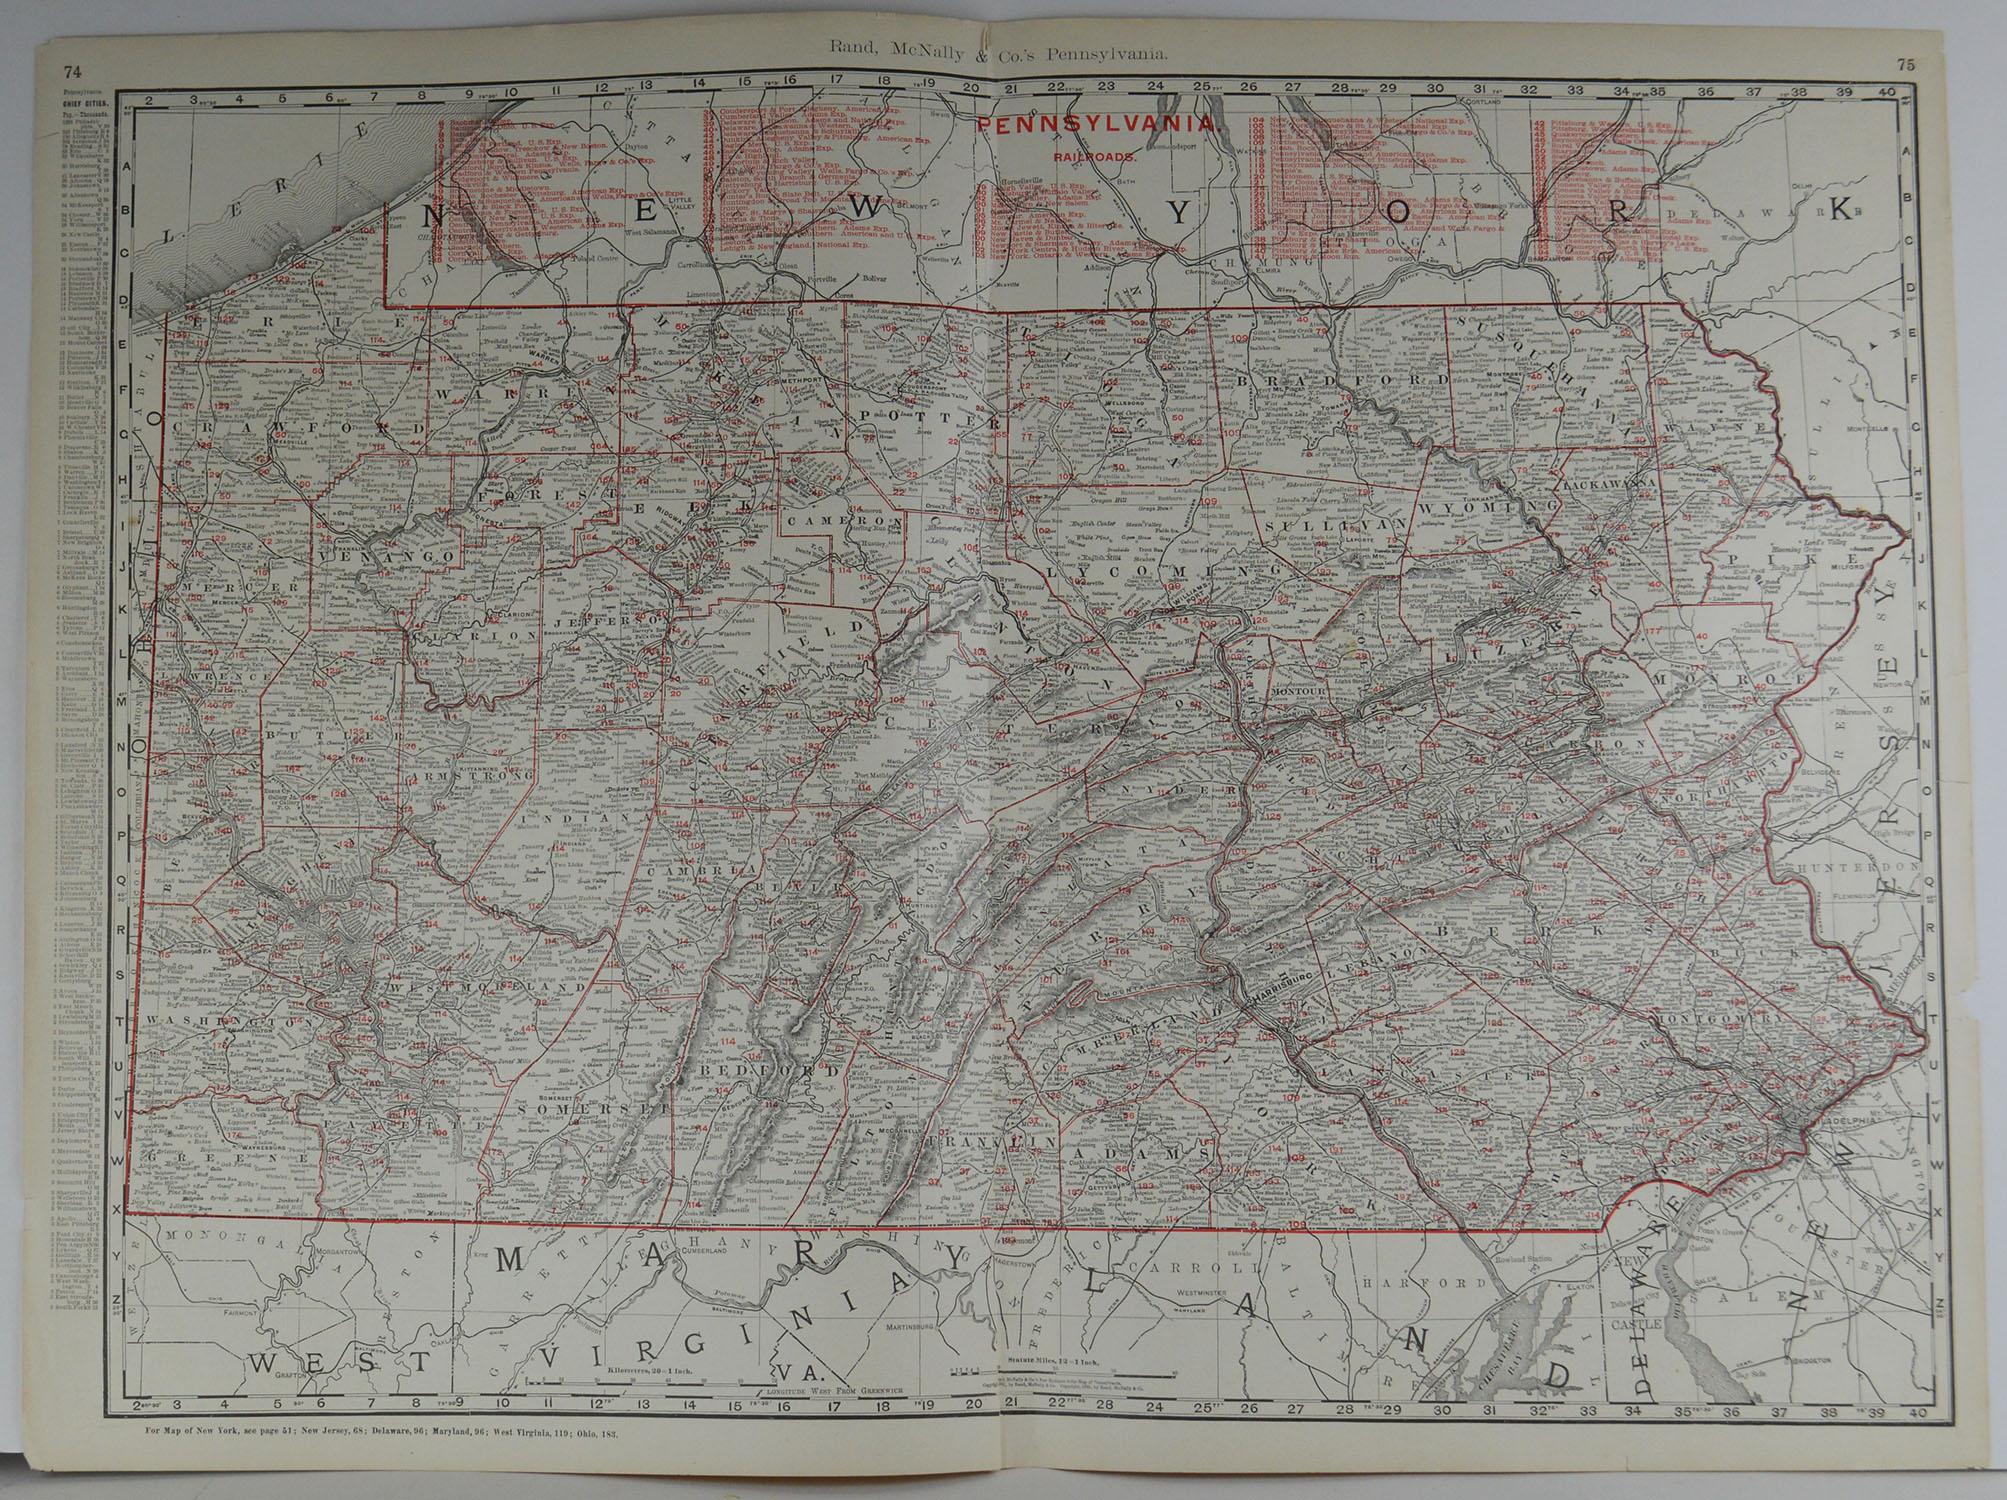 Fabulous monochrome map with red outline color 

Original color

By Rand, McNally & Co.

Published circa 1900

Unframed

minor edge tears and slight paper loss on right margin.